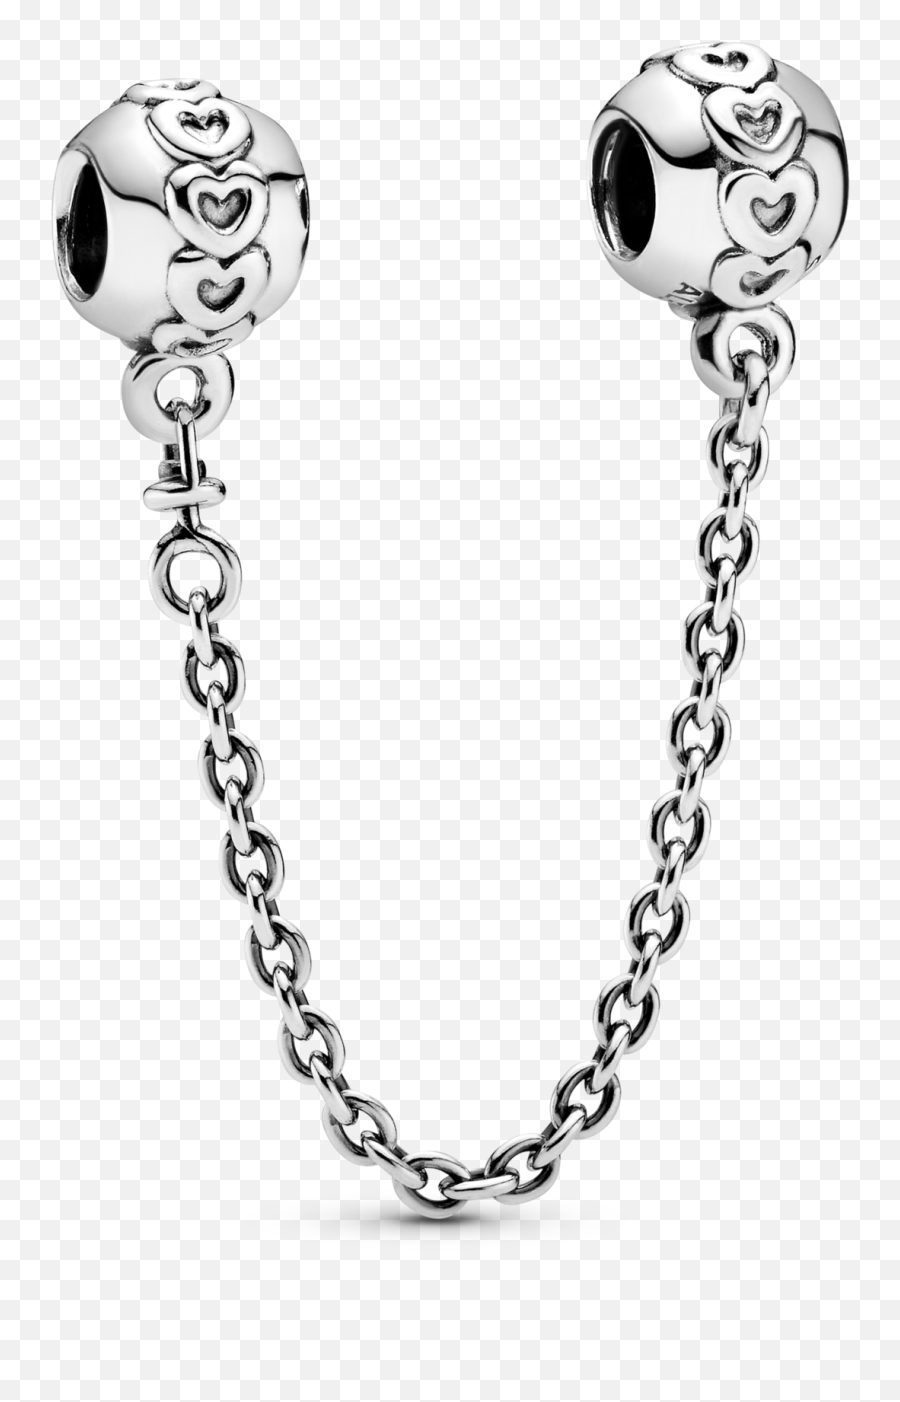 Hearts Silver Safety Chain Hk Pandora Online Store - Pandora Safety Charm Png,Chain Circle Png